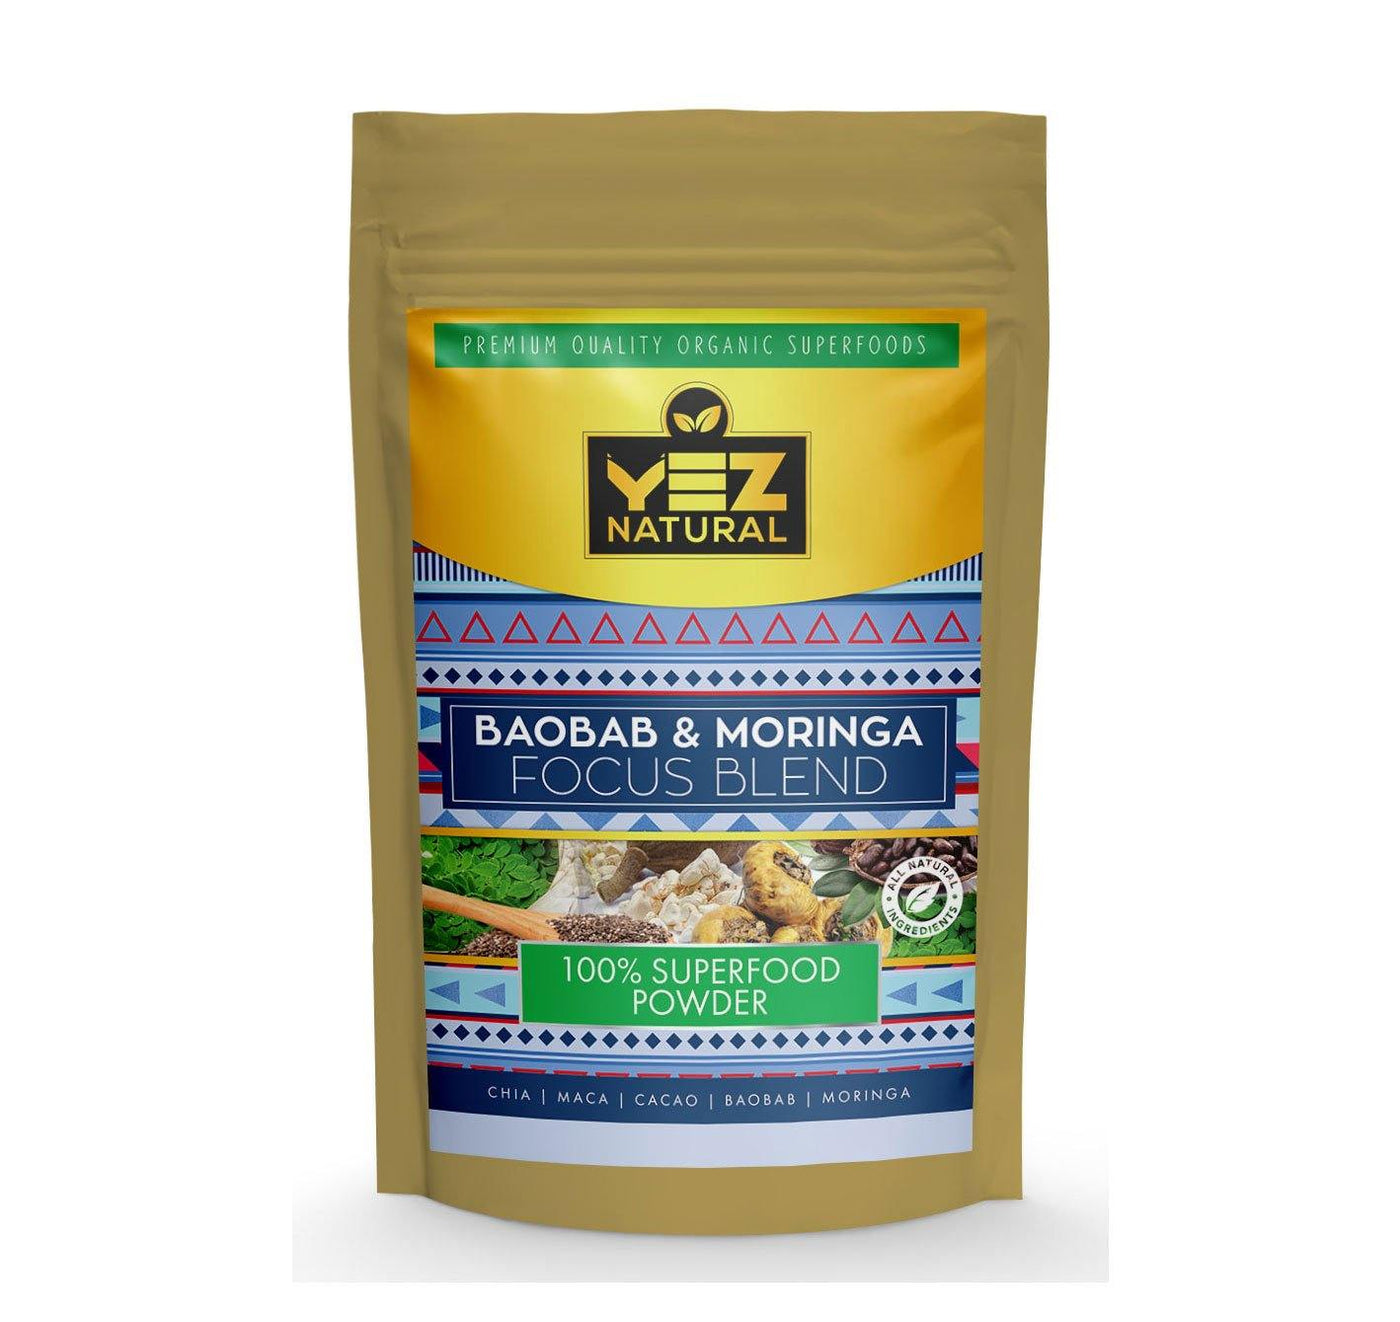 Plant-Based Superfoods Powder Mix to Boost your Brain and Focus - YezNatural.com